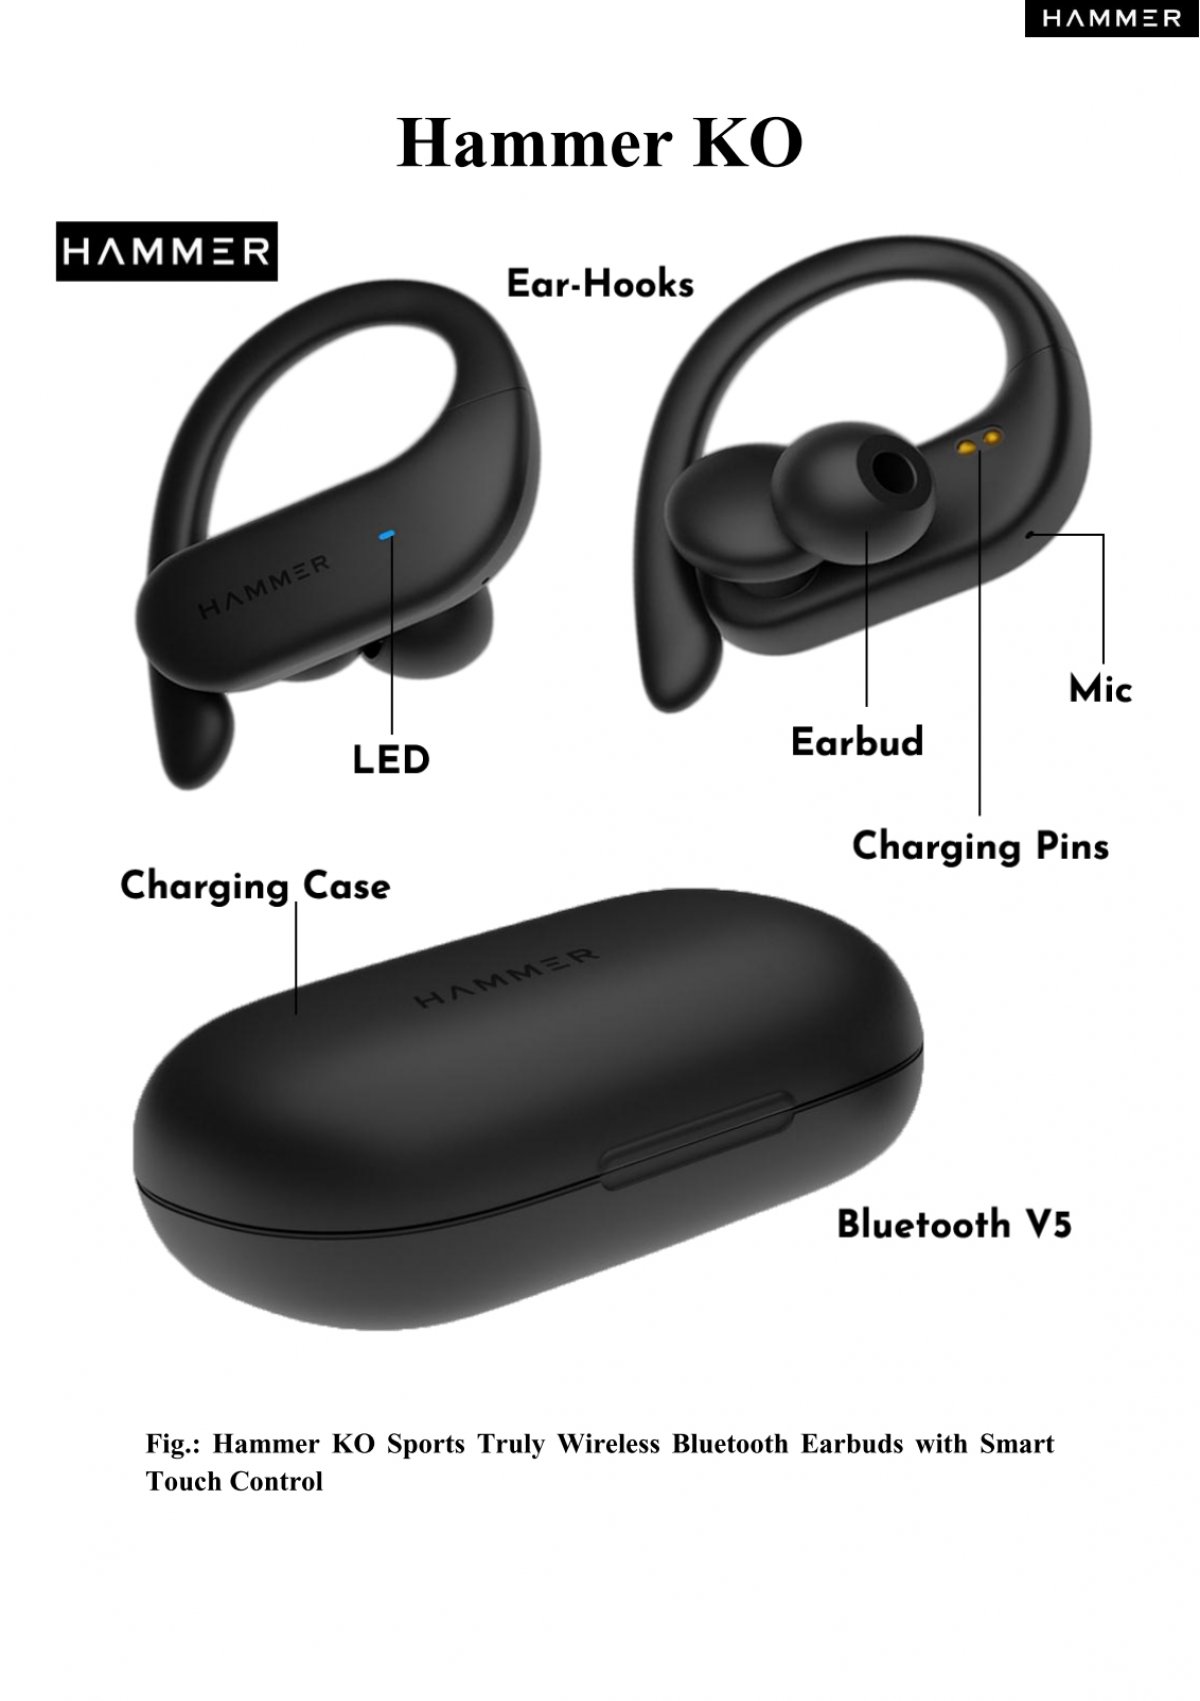 Hammer KO Mini Bluetooth Earbuds with Touch Controls (Black)